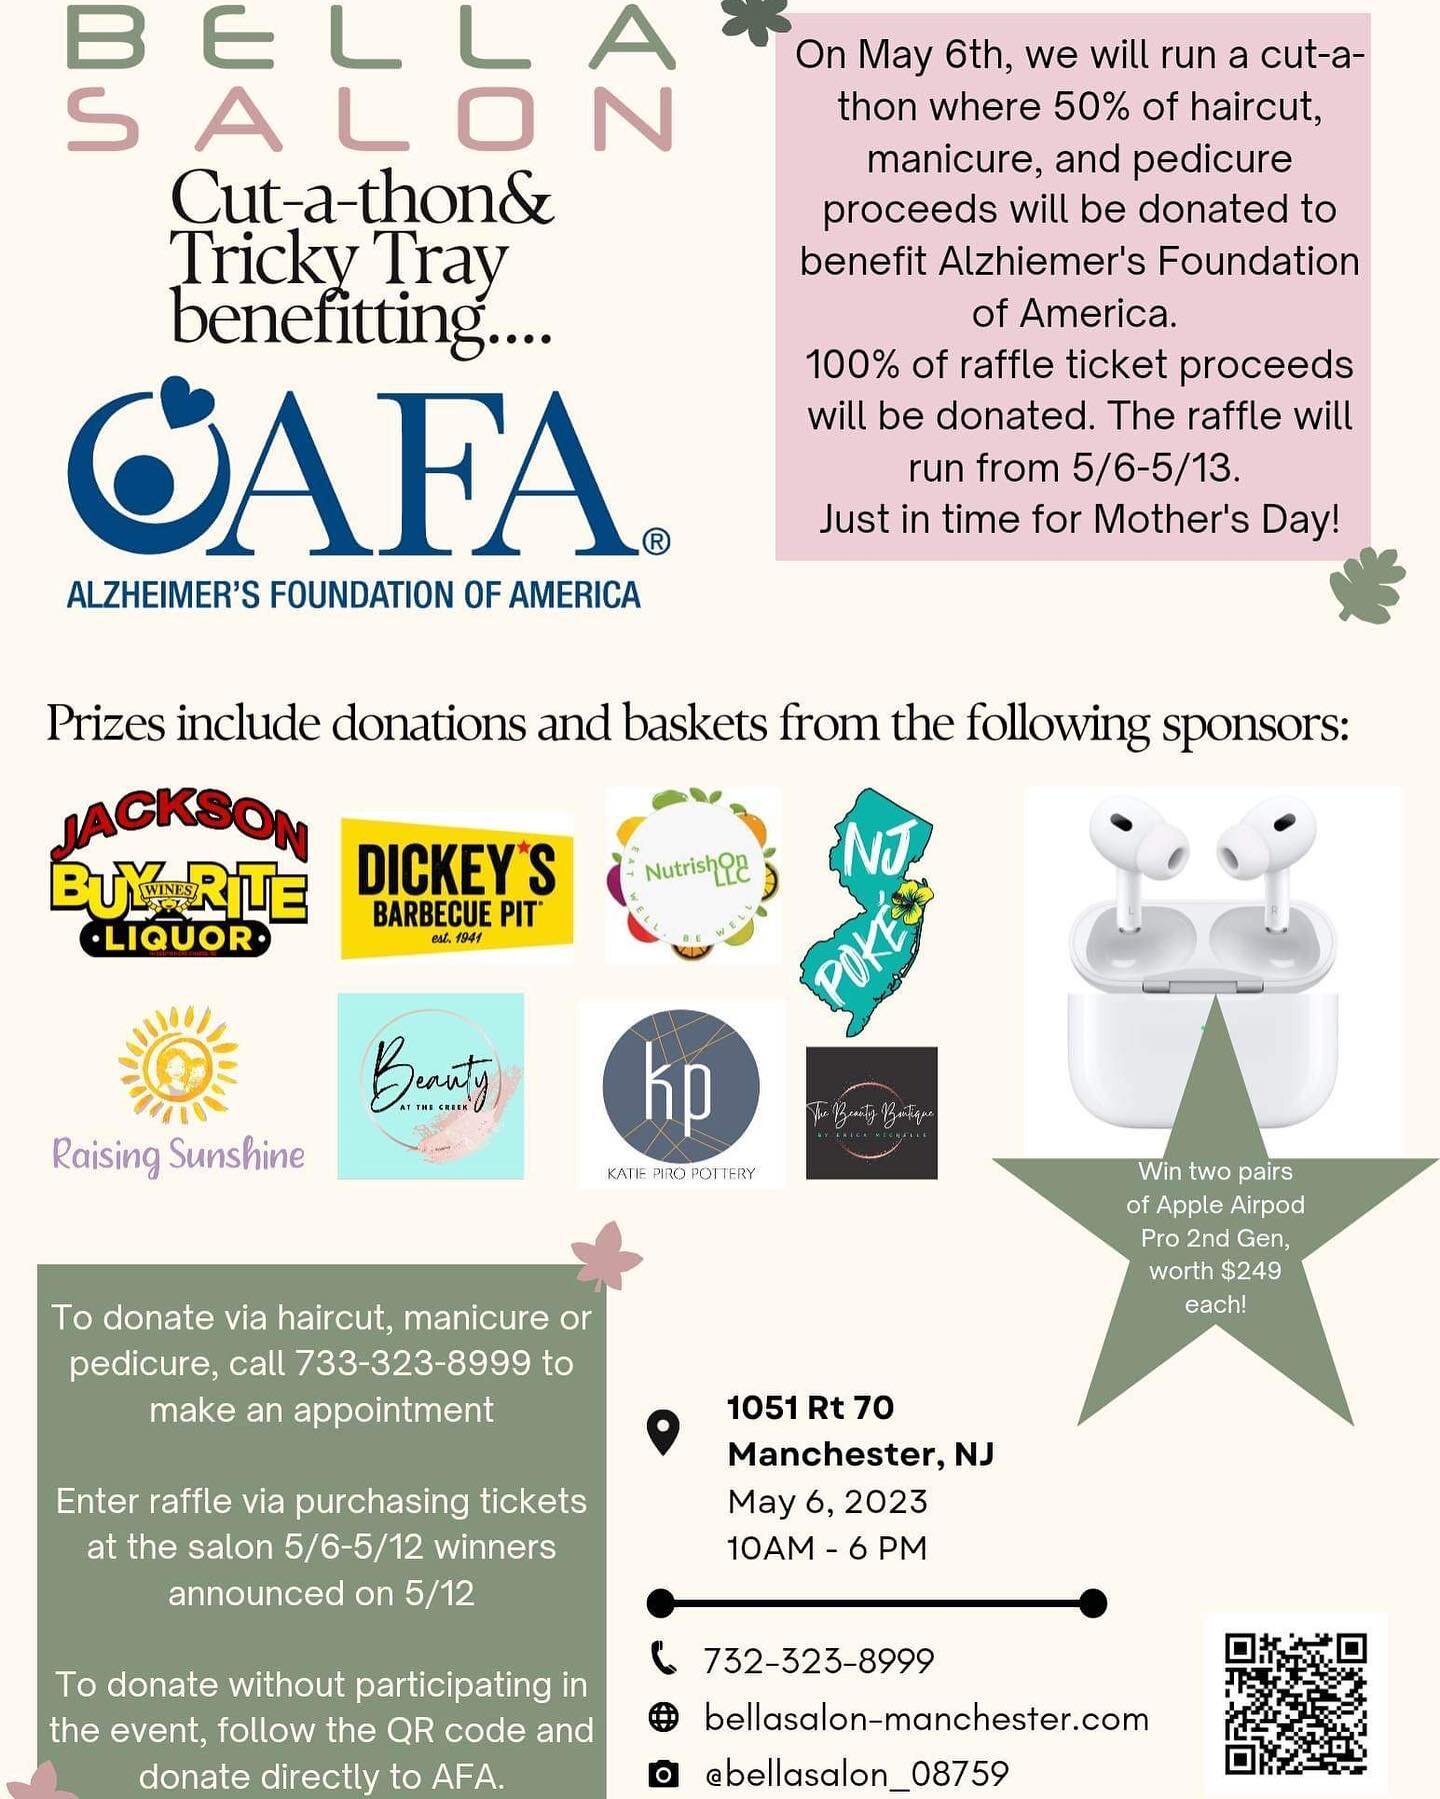 Hey guys- donated a &ldquo;Self-care&rdquo; basket for this awesome event! Go get pampered on May 6 to bring awareness and charity to an awesome cause! (My basket is featuring a free week of meal plans!) #giftauction #alzheimersawareness #charityeven